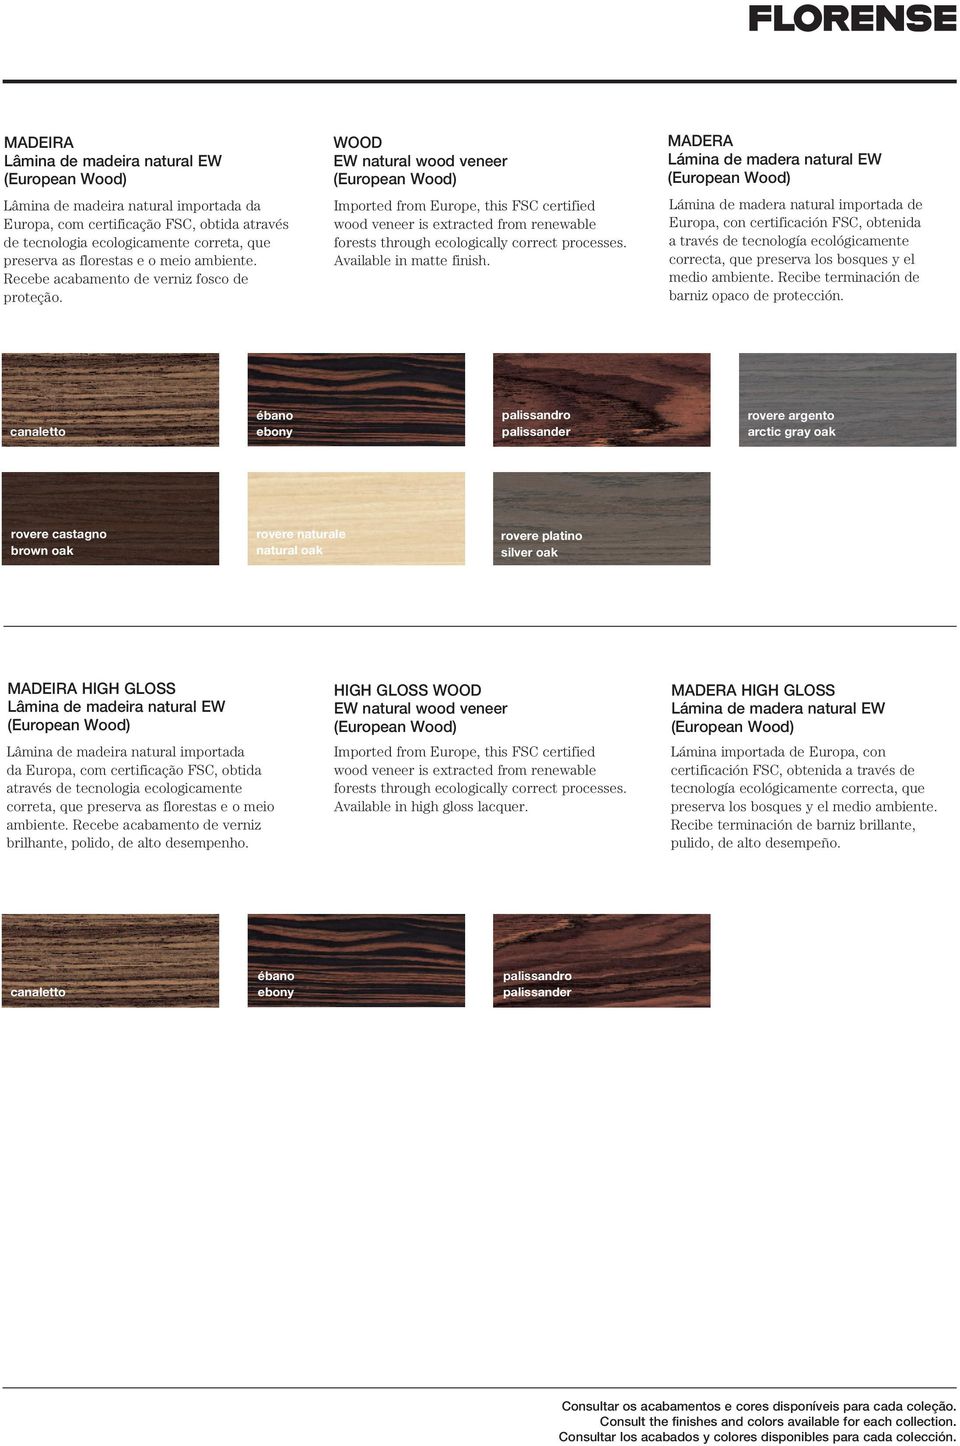 WOOD EW natural wood veneer Imported from Europe, this FSC certified wood veneer is extracted from renewable forests through ecologically correct processes. Available in matte finish.